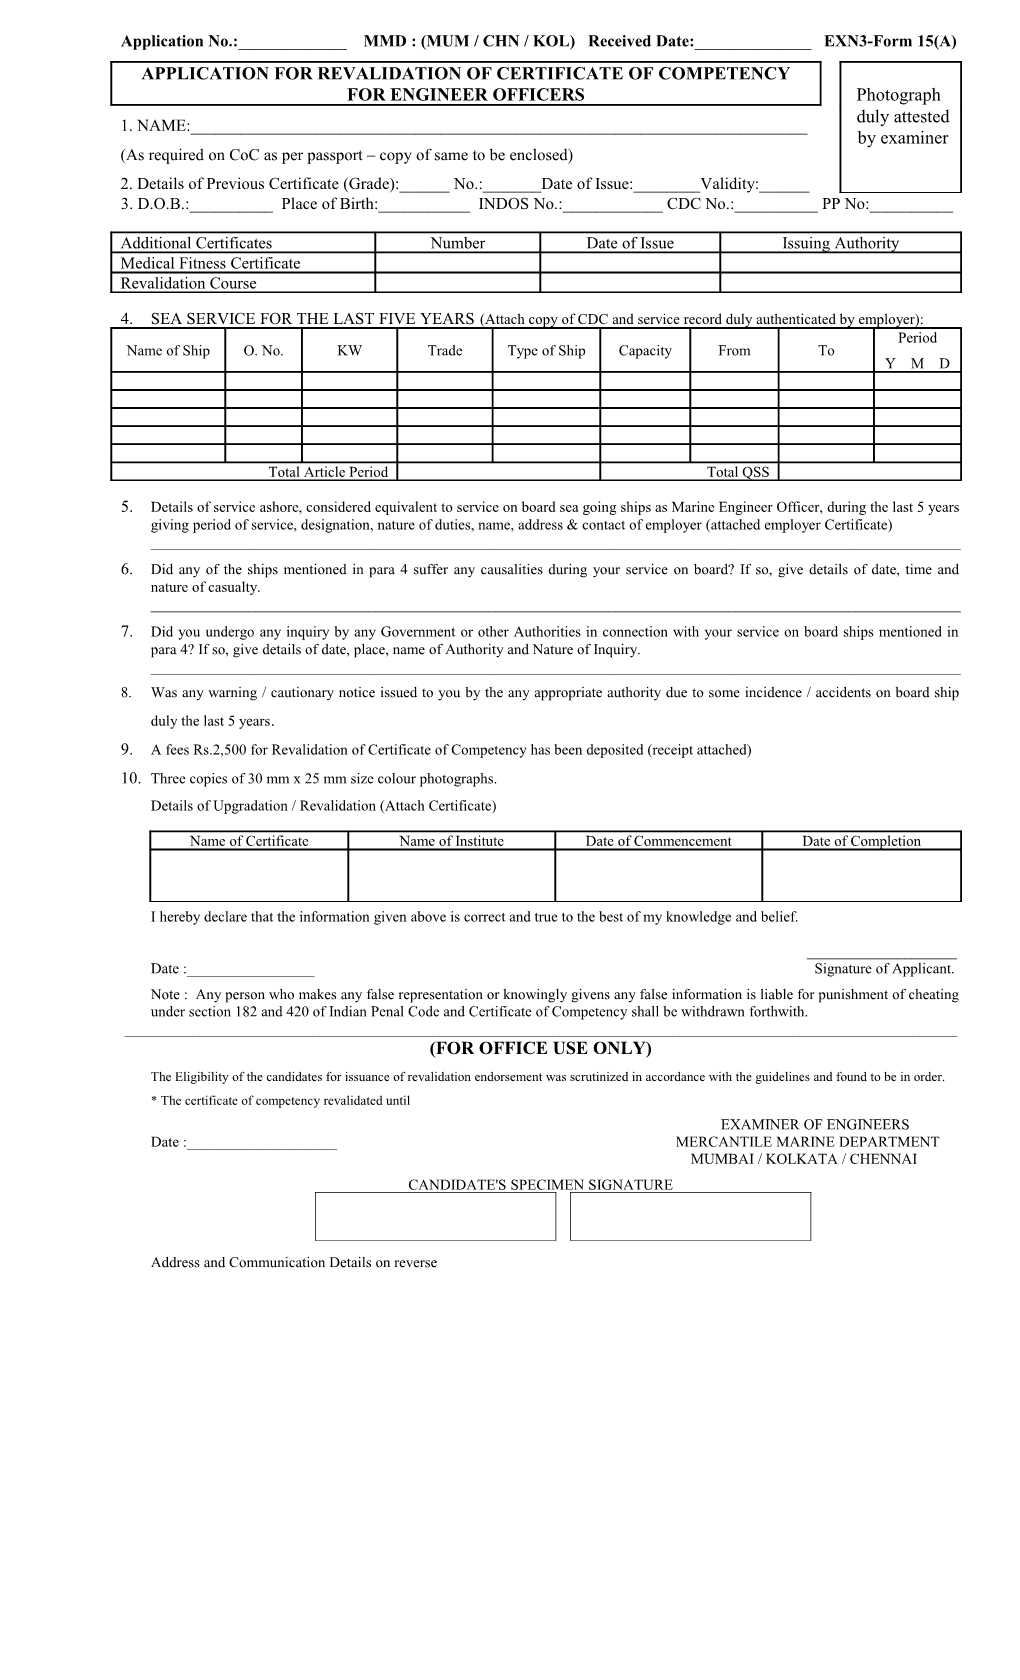 Application for Revalidation of Certificate of Competency for Engineer Officers